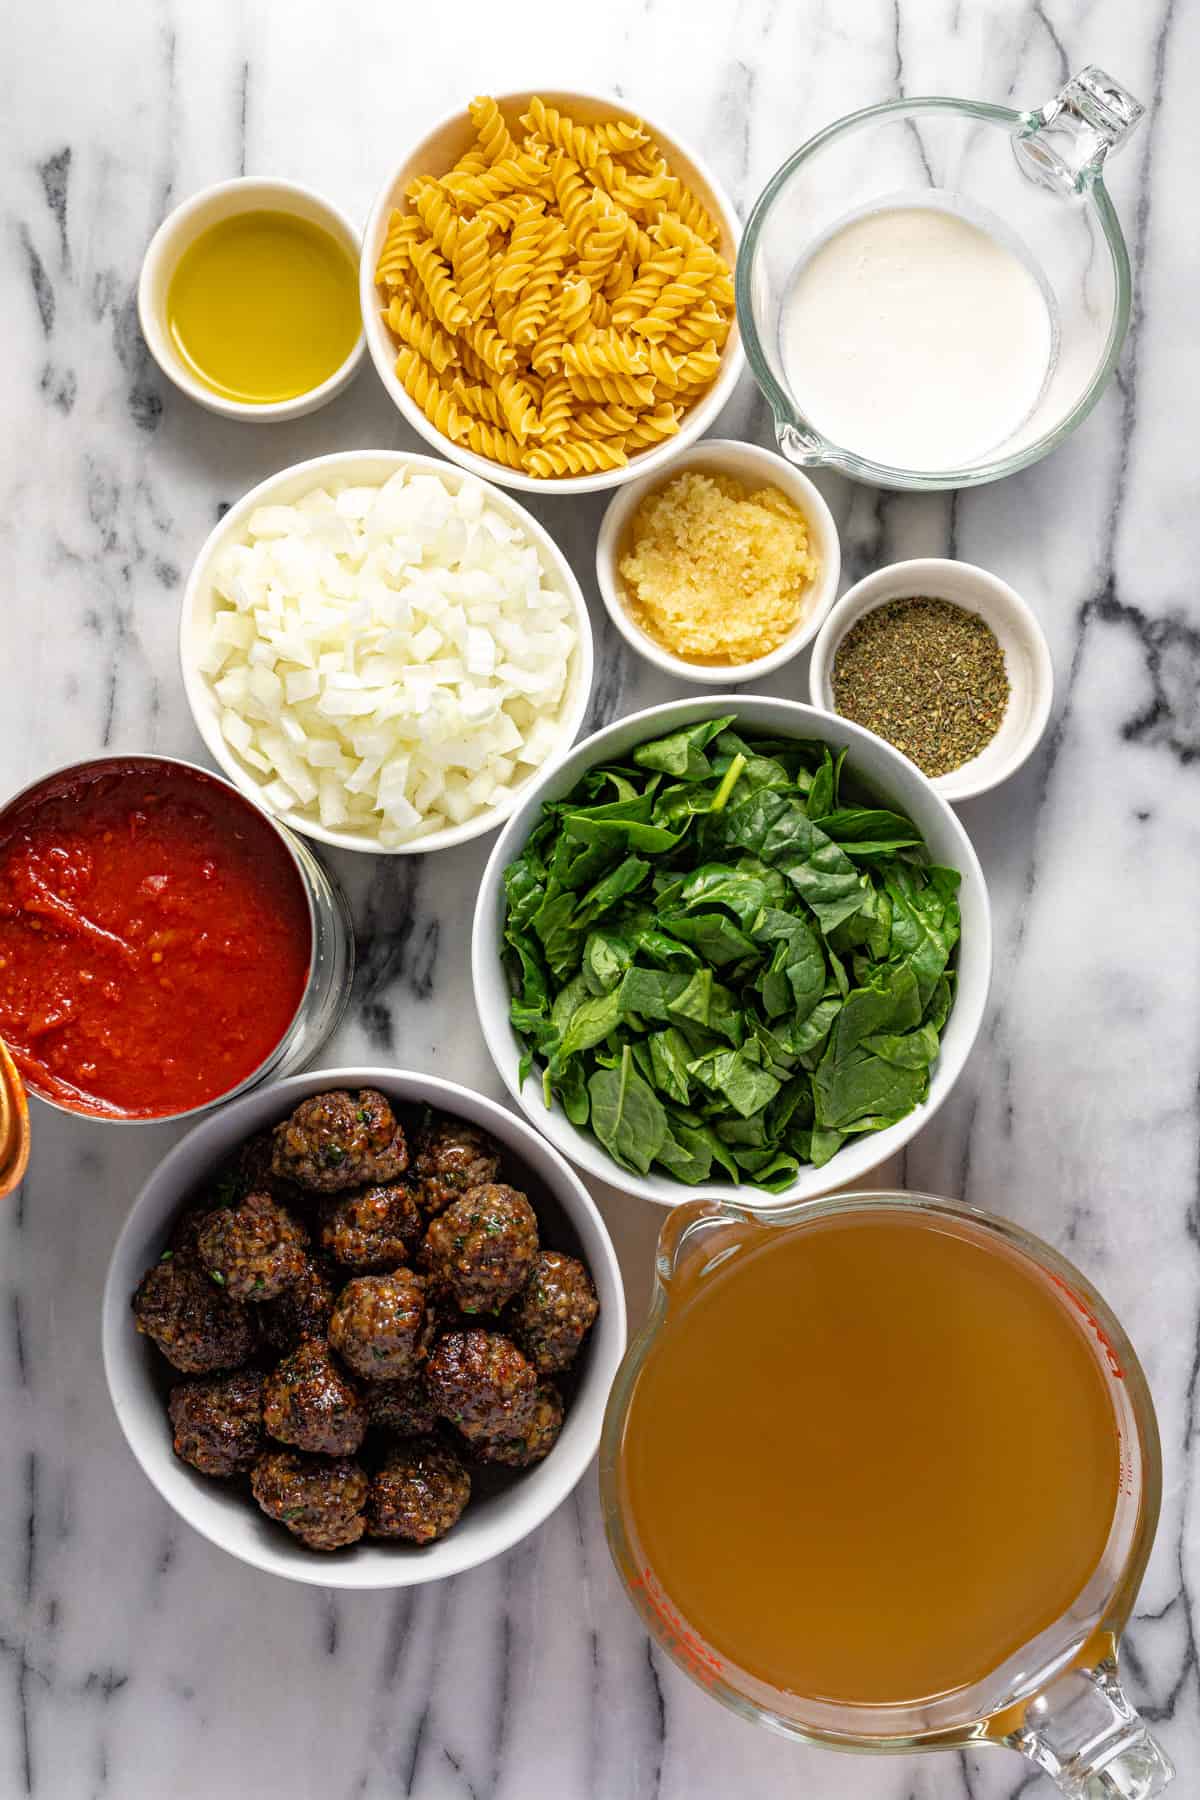 White marble counter top with bowls of ingredients to make creamy meatball soup.